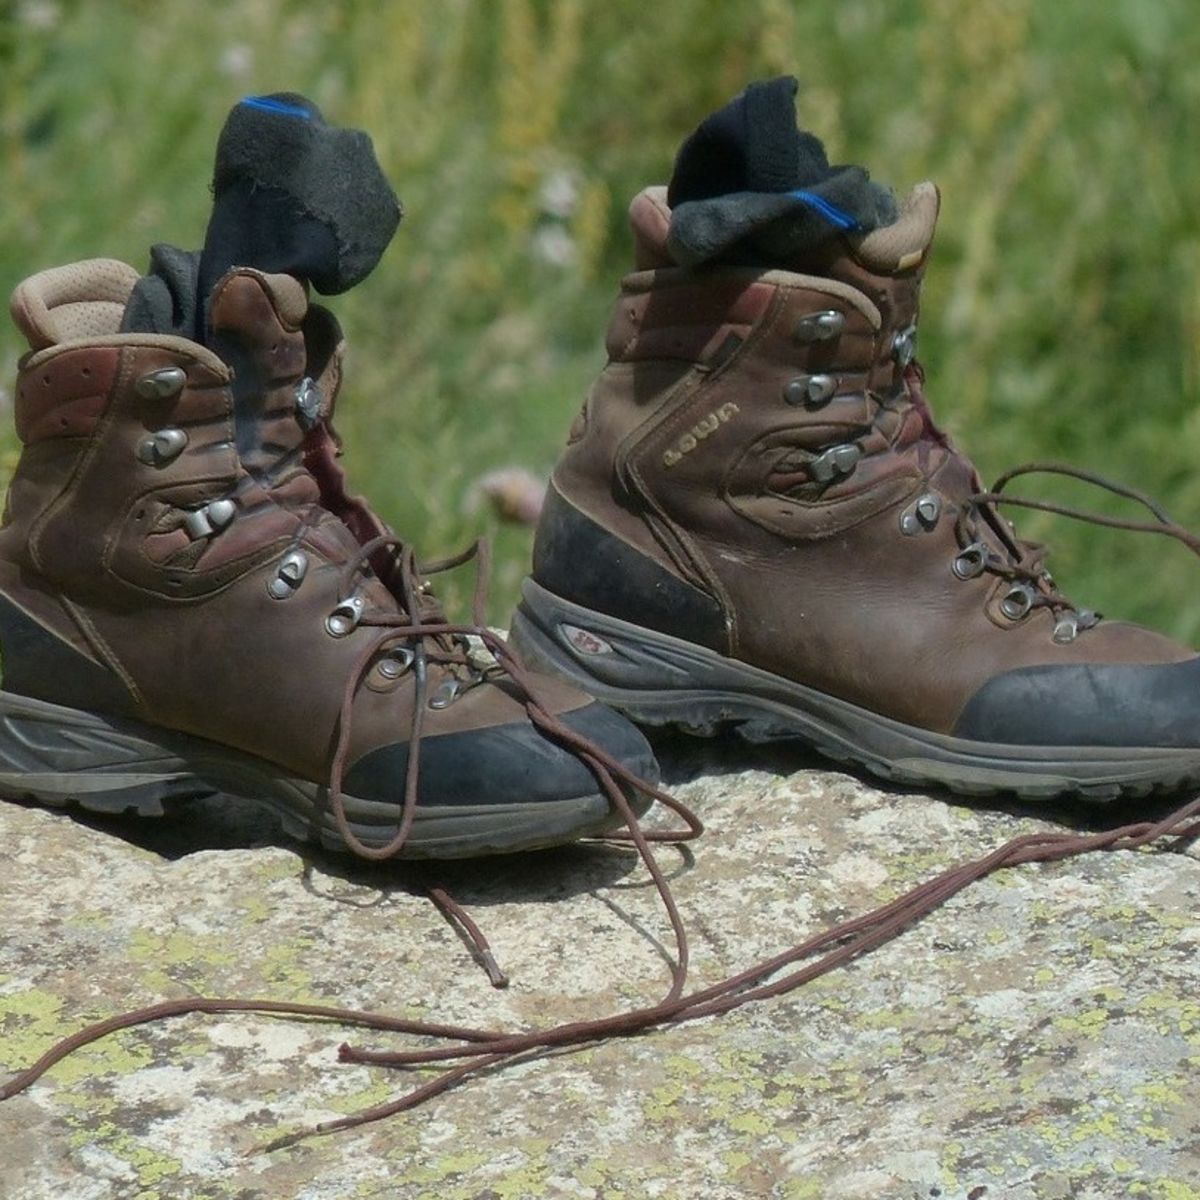 Hiking boot with loose laces and socks on a rock outdoors